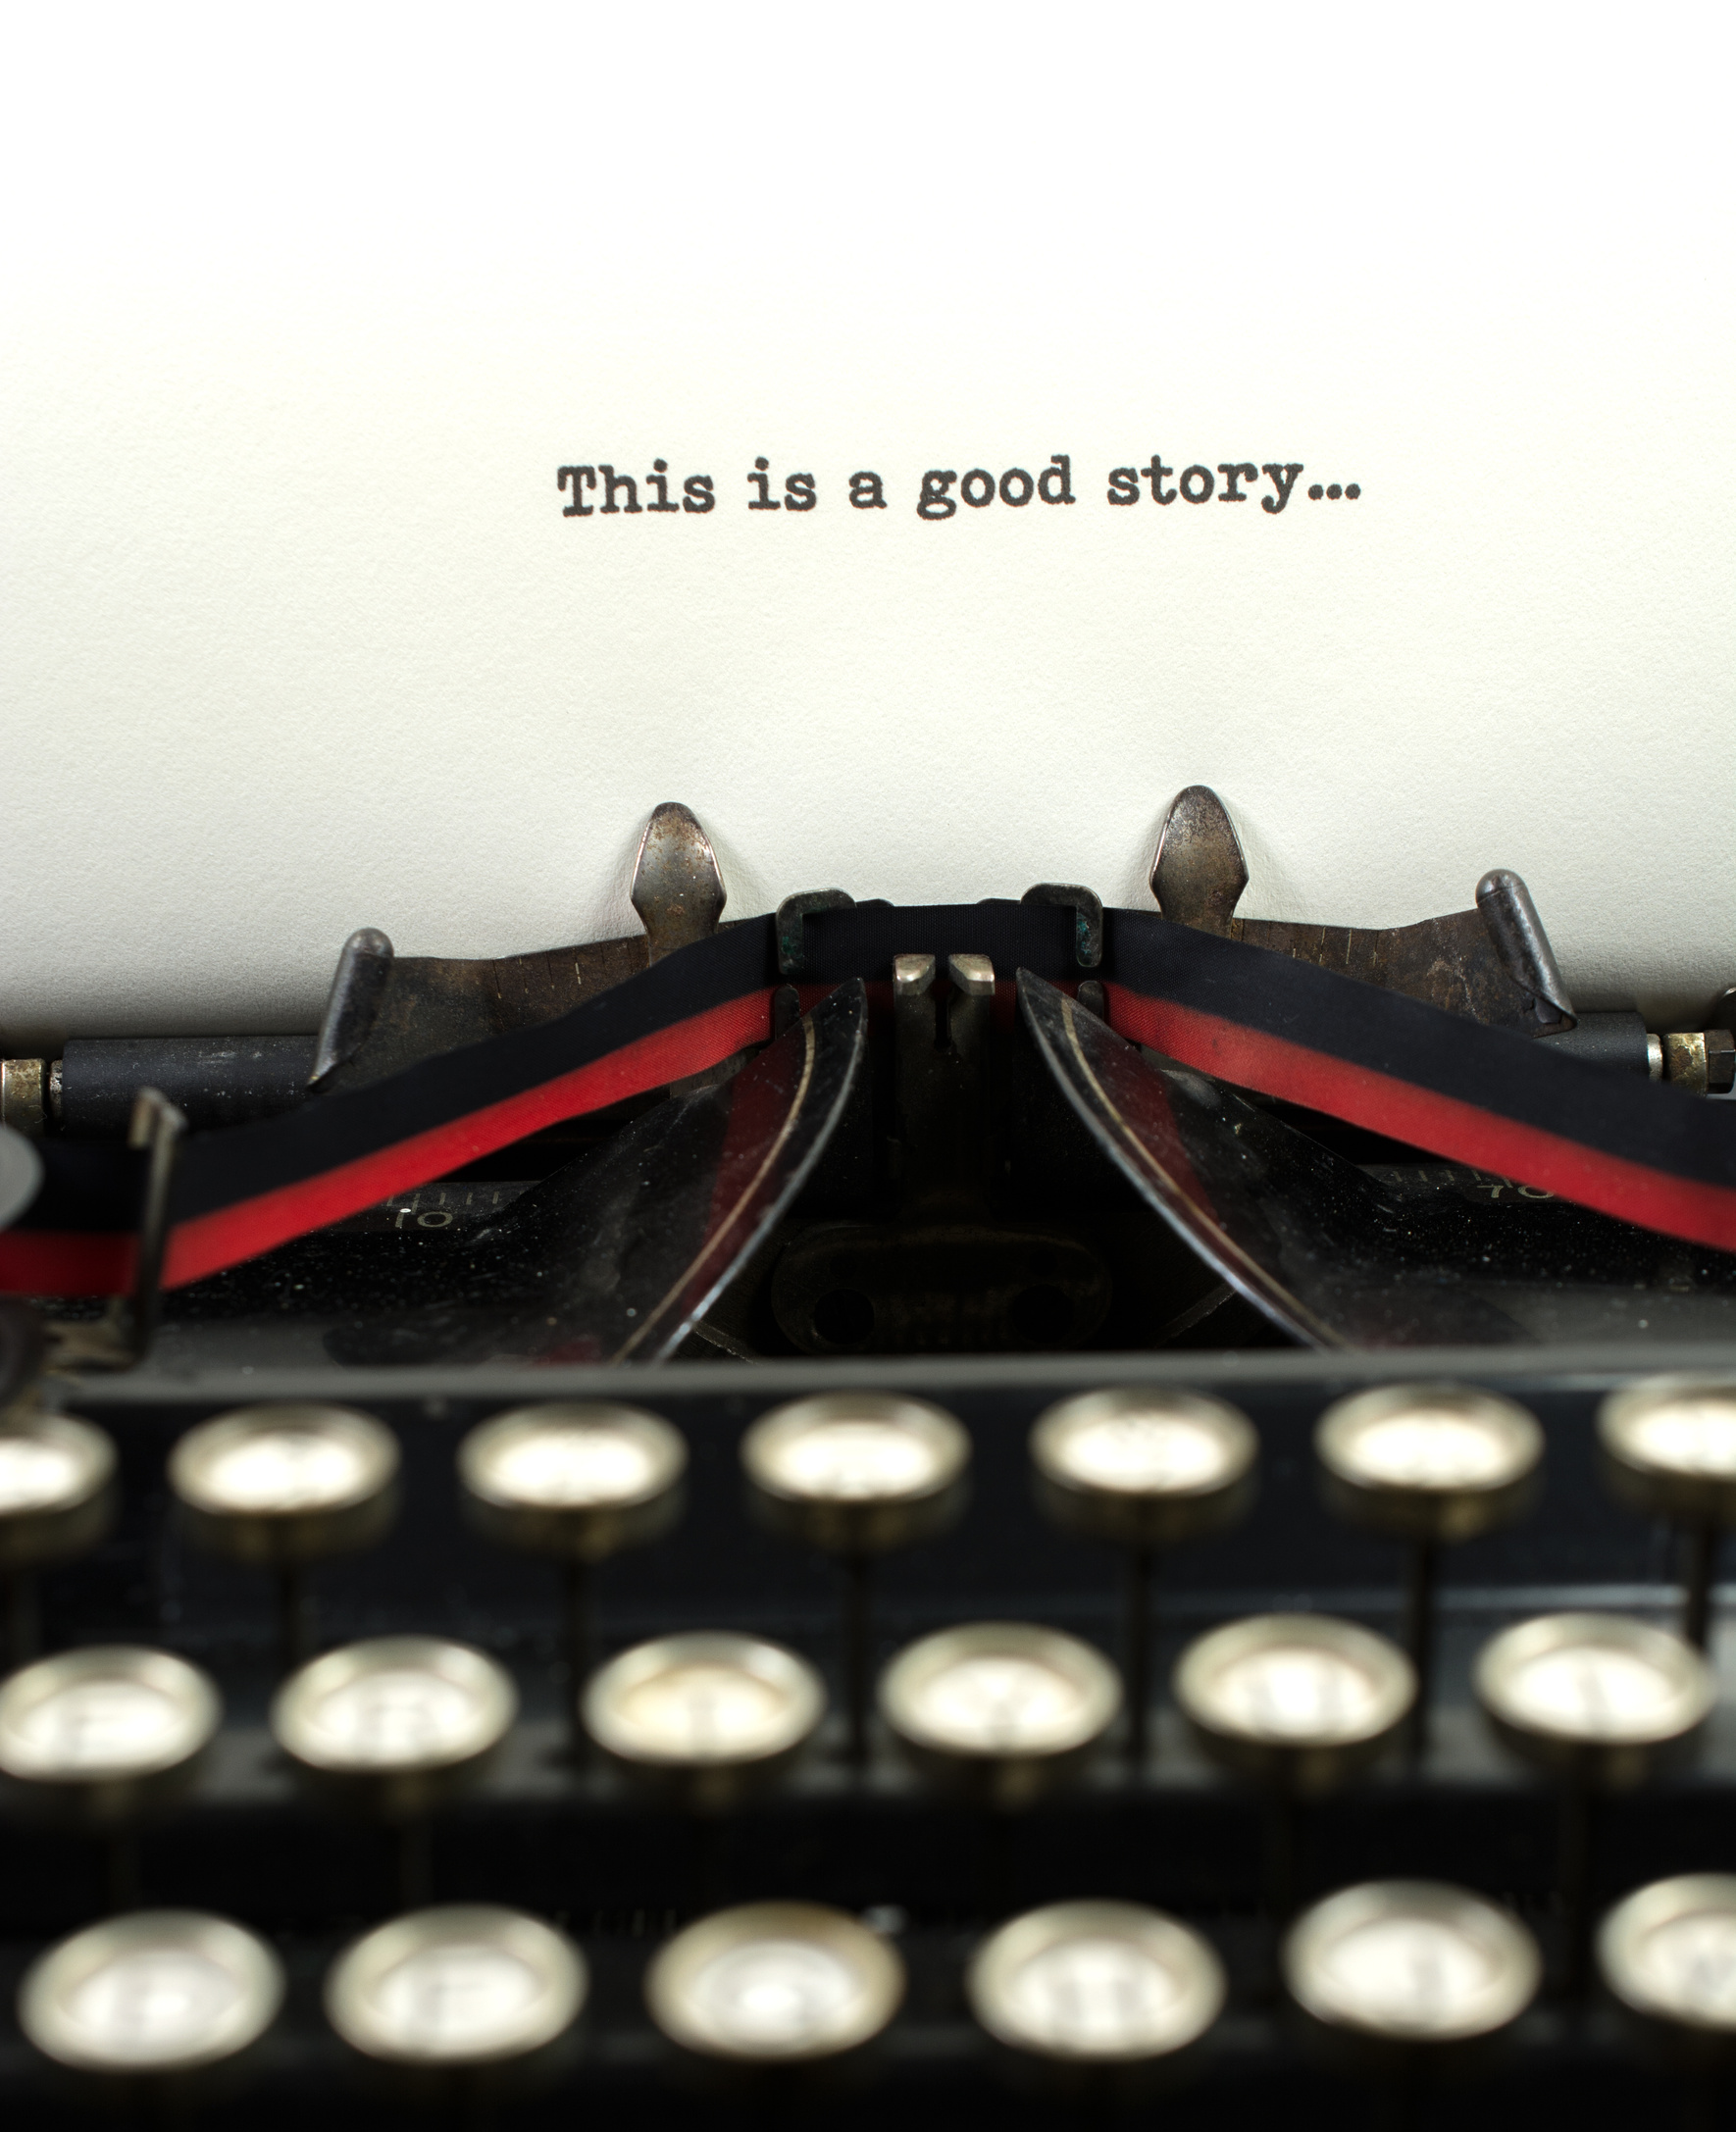 Close-up antique typewriter with this good story